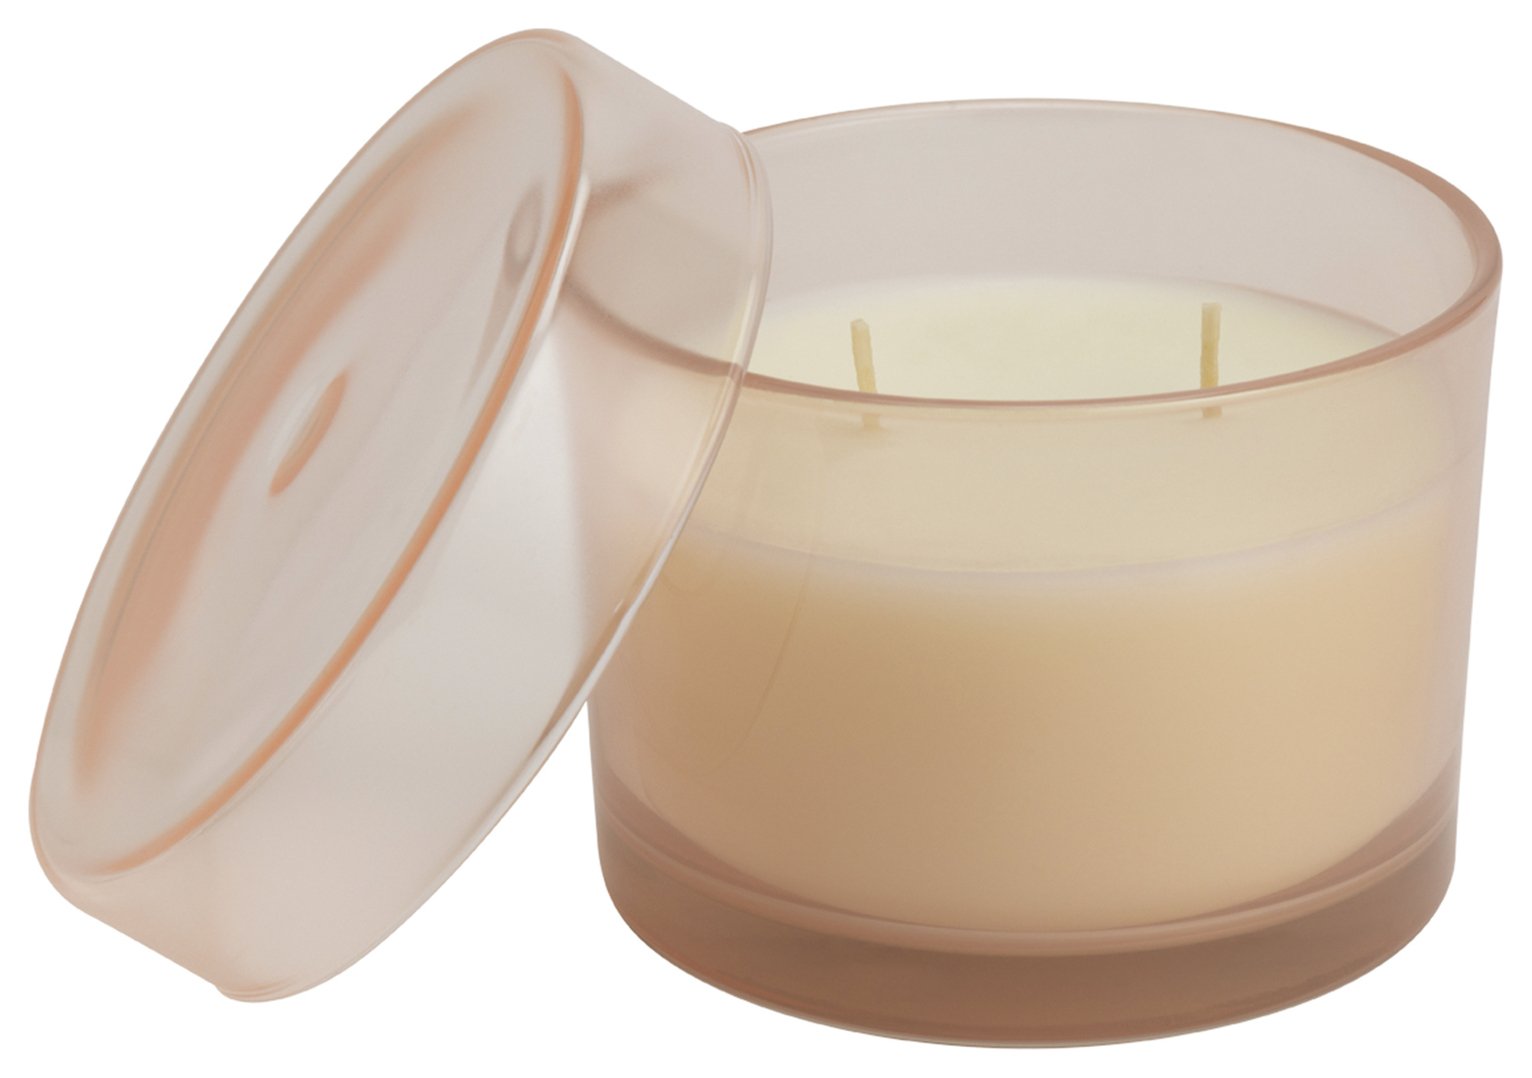 Habitat Large Multi Wick Candle - Coconut Water & Amber